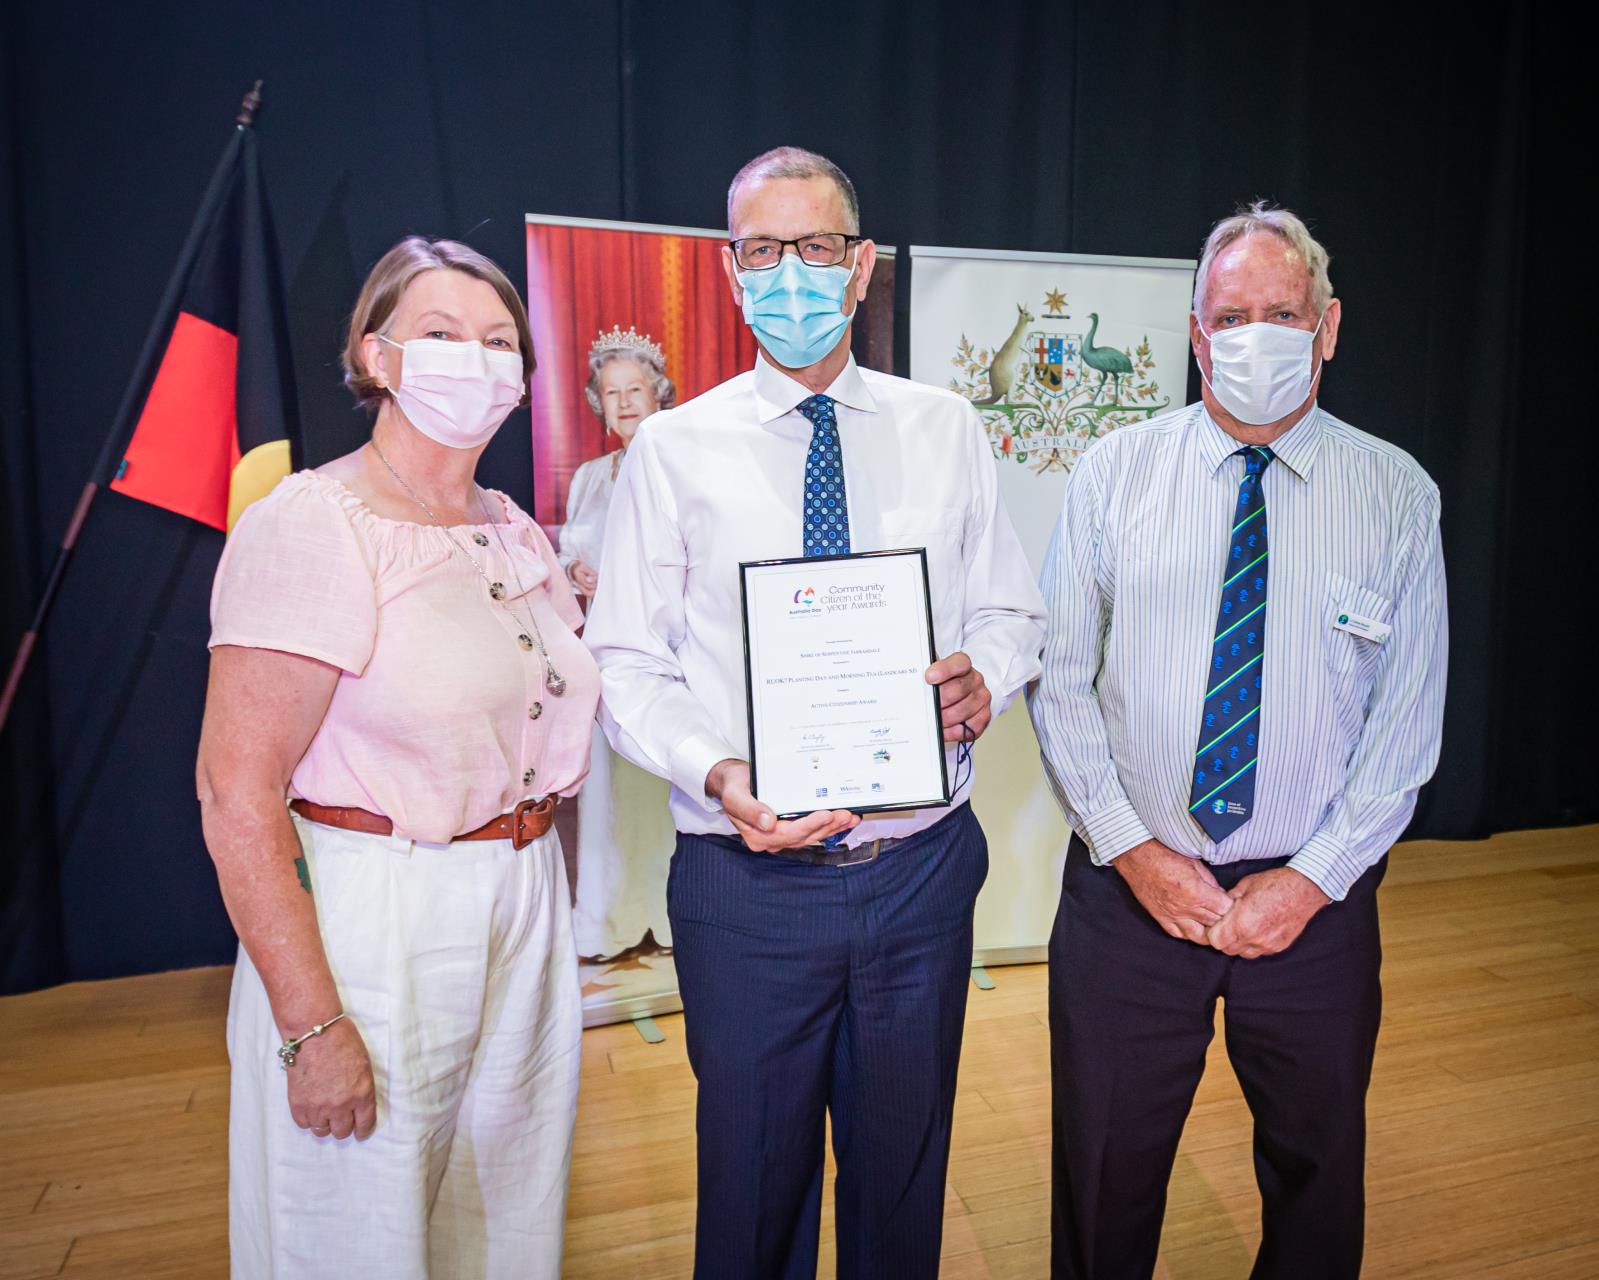 Image containing 3 people: Shire President, Active Group or Event recipient, Deputy Shire President